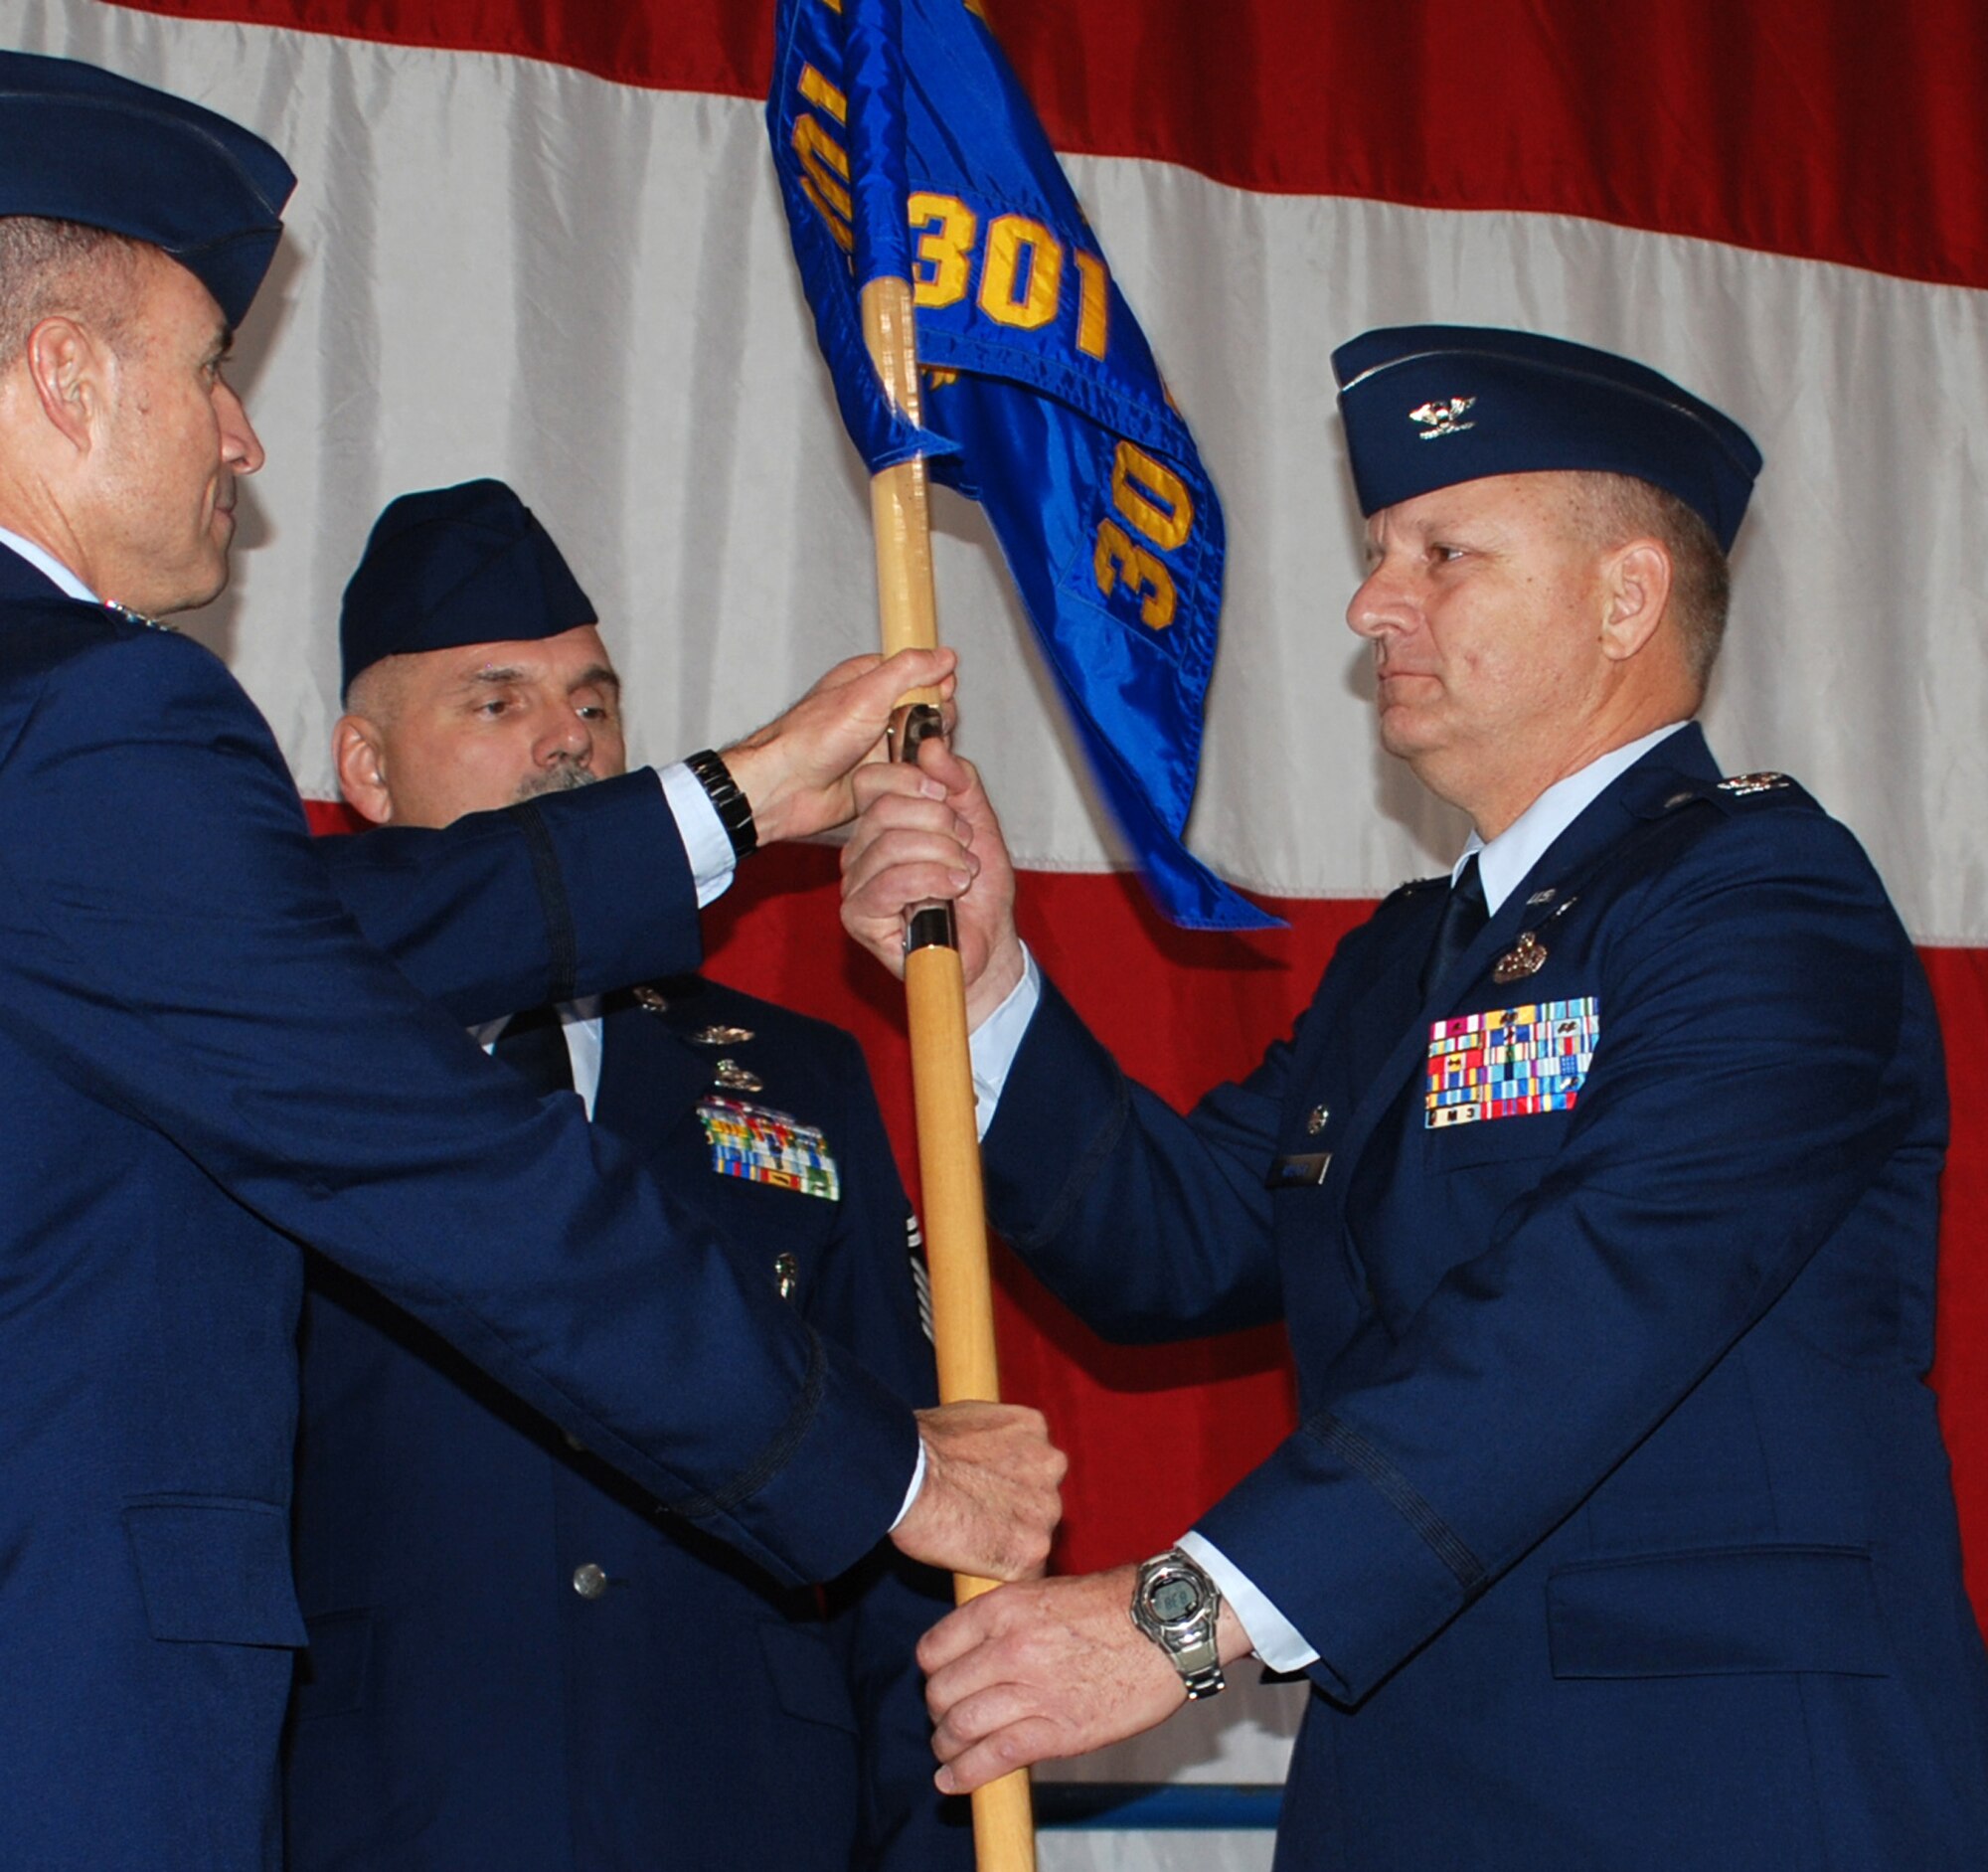 The new 301st Mission Support Group Commander, Col. Joylcon Walker, accepts the  MSG guidon from Col. Kevin E. Pottinger, 301st Fighter Wing commander, as Senior Master Sgt. Ben Combs looks on during a recent change of command ceremony at the Naval Air Station Joint Reserve Base Fort Worth, Texas. (U.S. Air Force Photo/Tech. Sgt. Stephen Bailey)